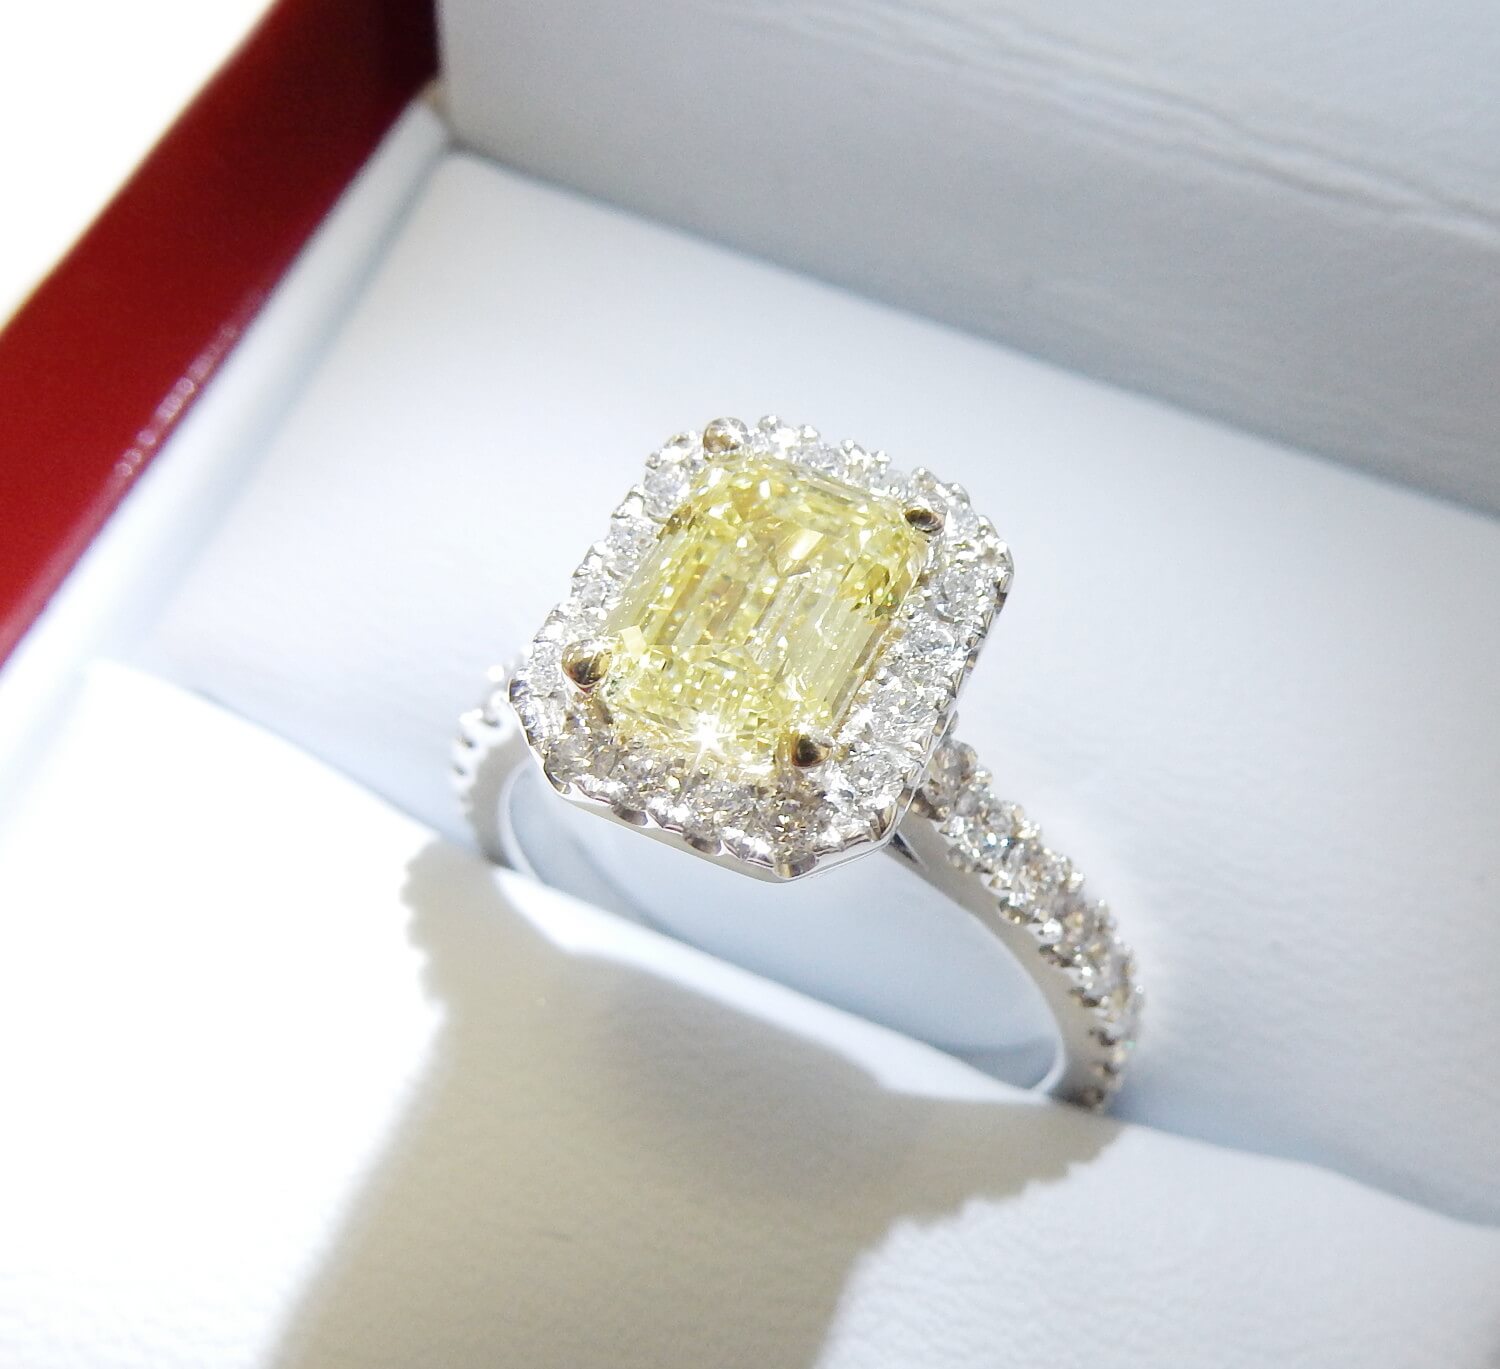 Yellow Diamond Jewellery Online, SAVE | vlr.eng.br